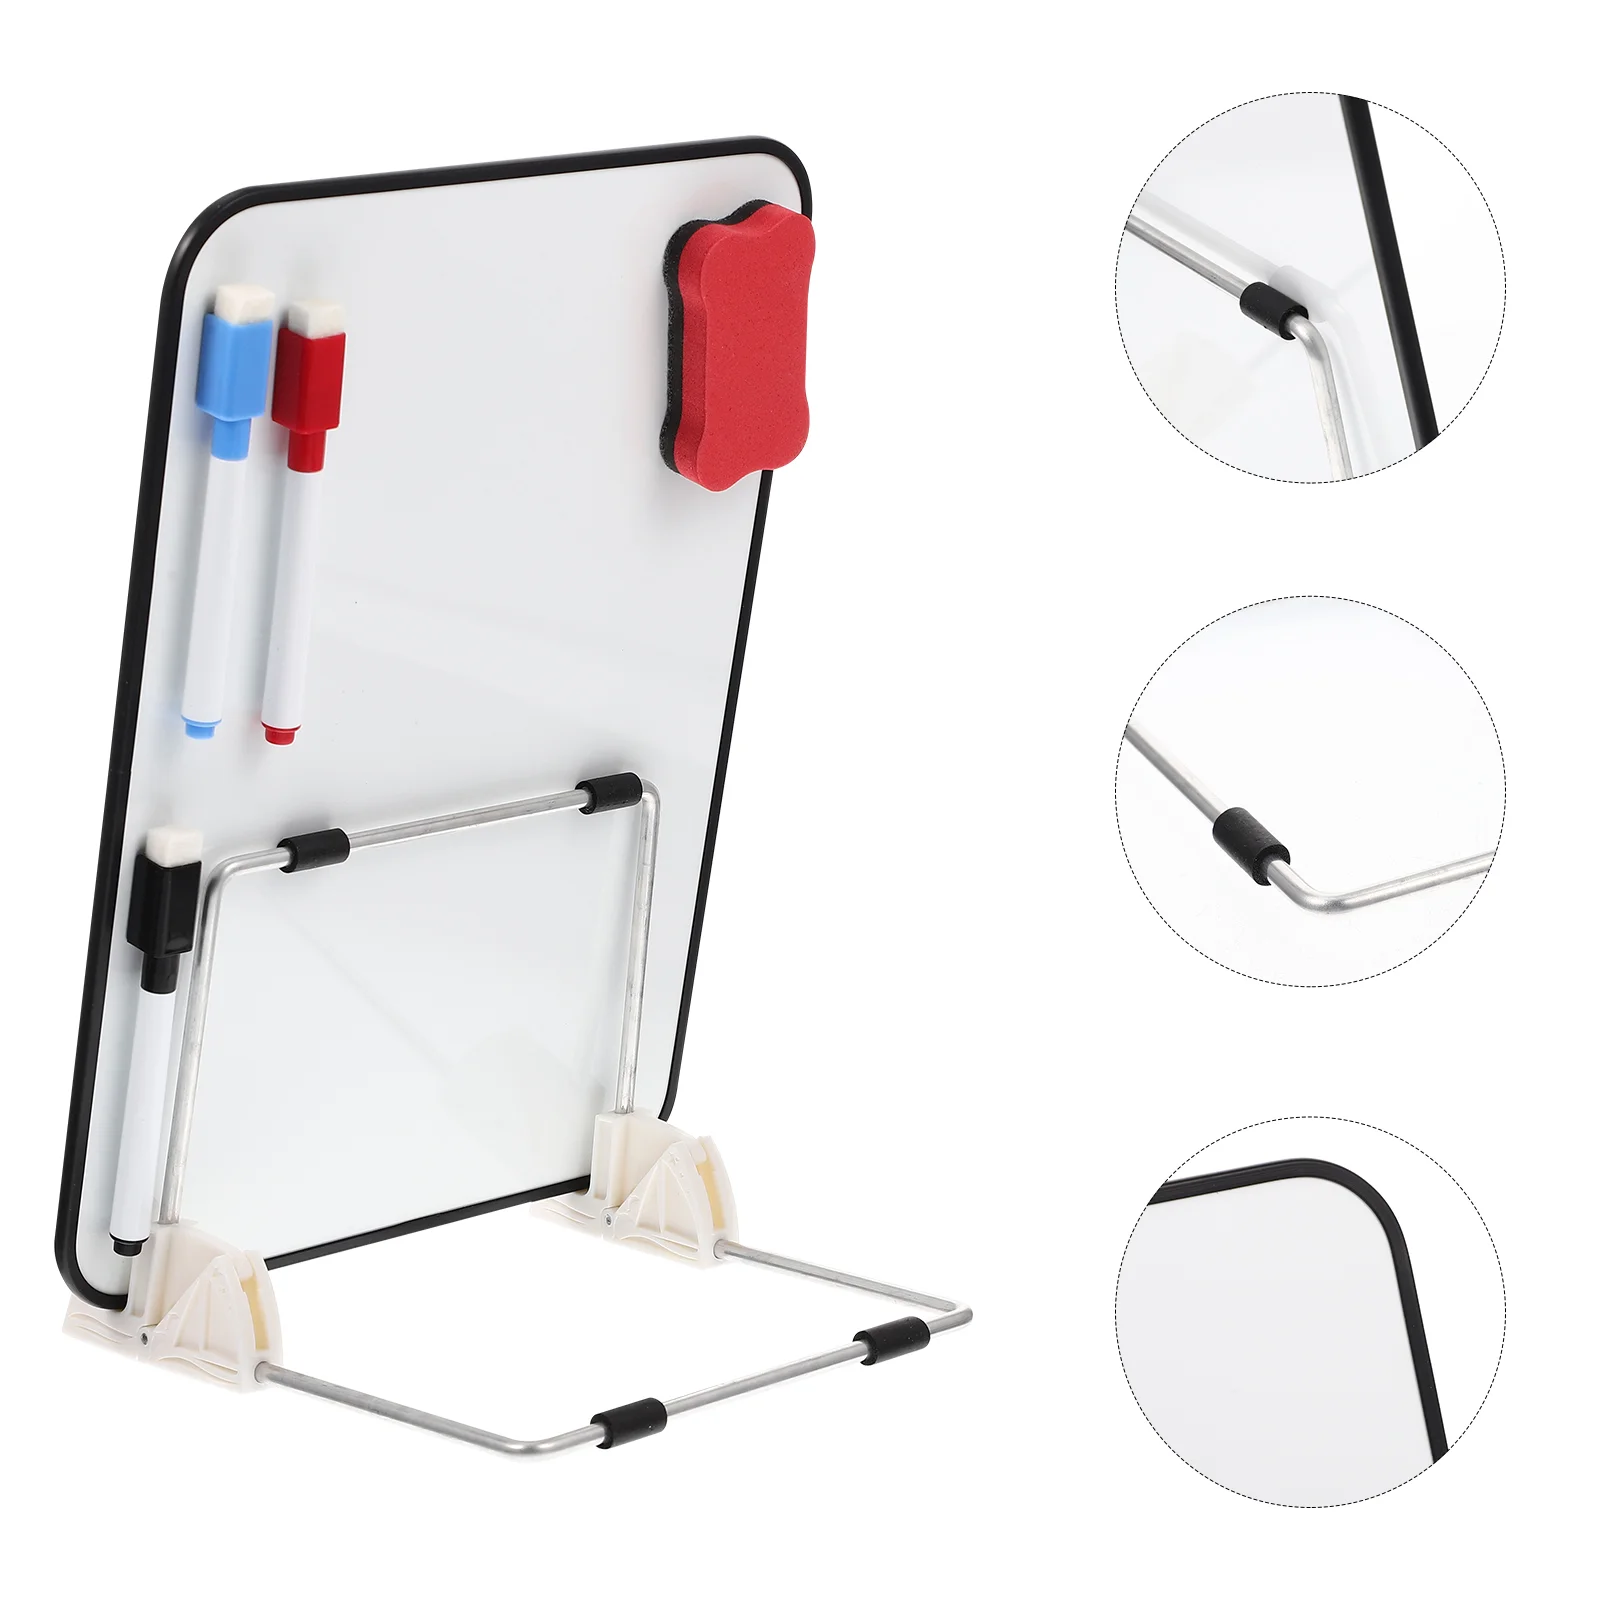 Whiteboard Writing Board Kids Erasers Table Easel Whiteboard Erasable Easel White Board Plastic Dry Erase Markers Office